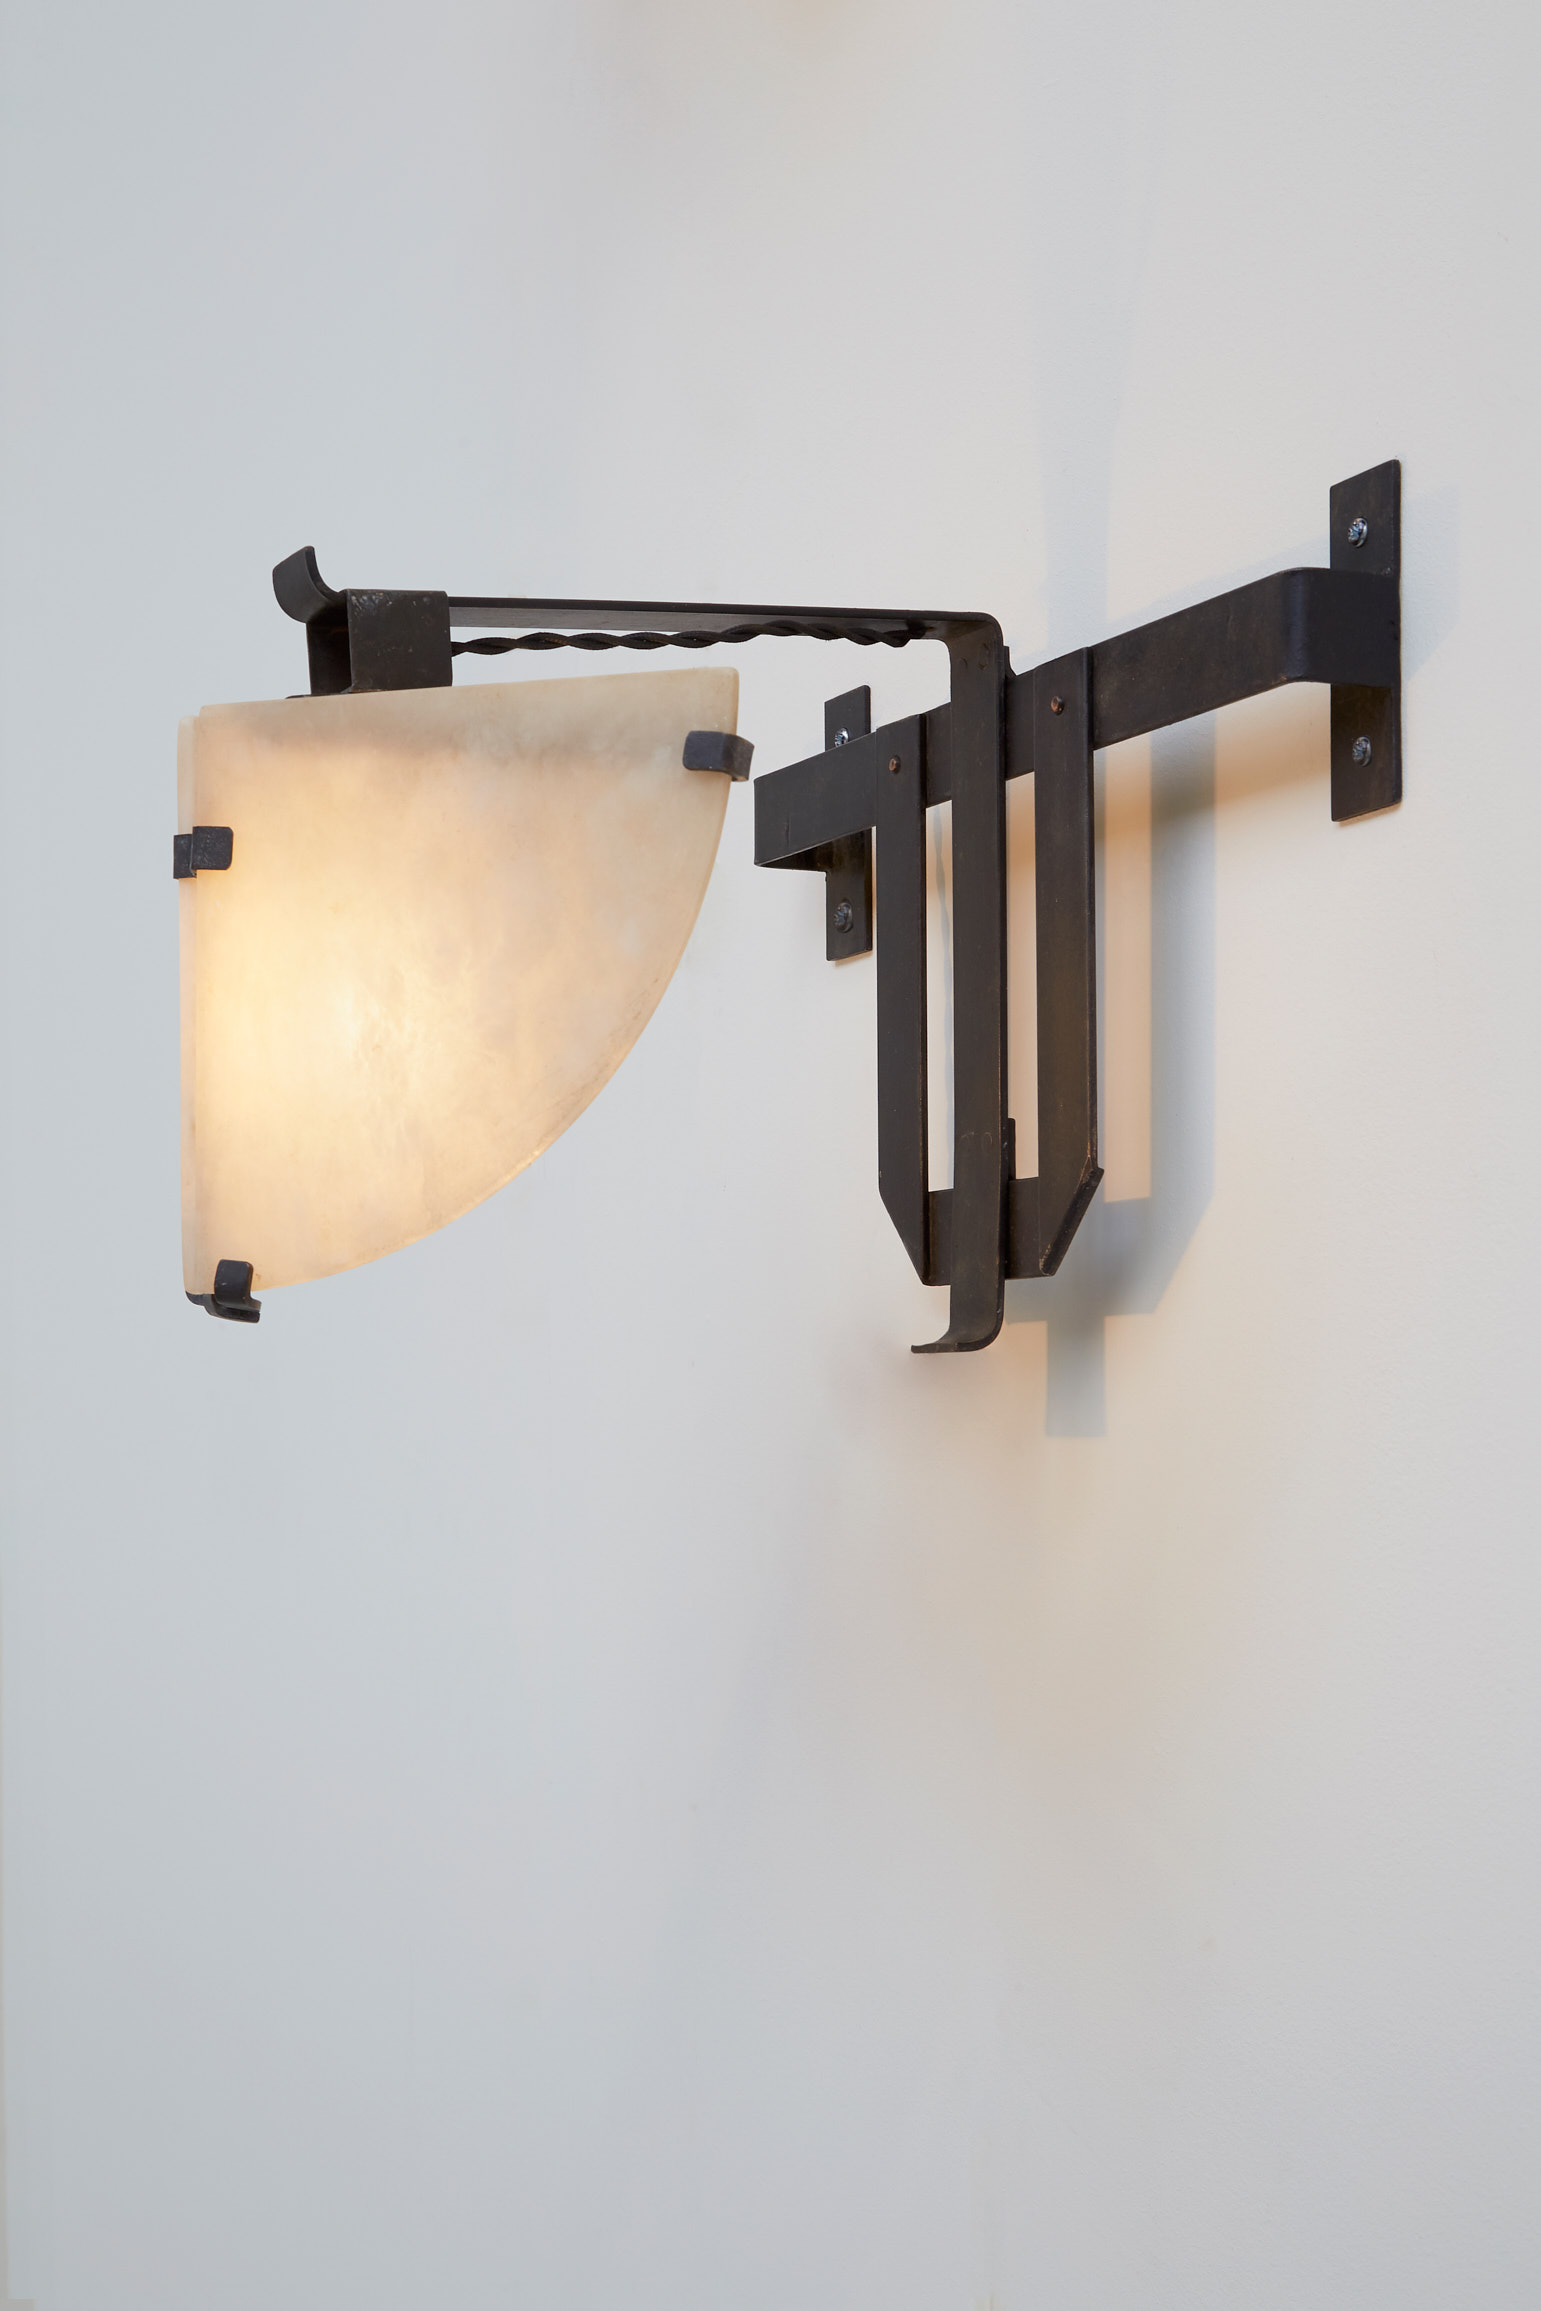 Pierre Chareau, Pair of LP180 wall lights entitled “Masque“, vue 01